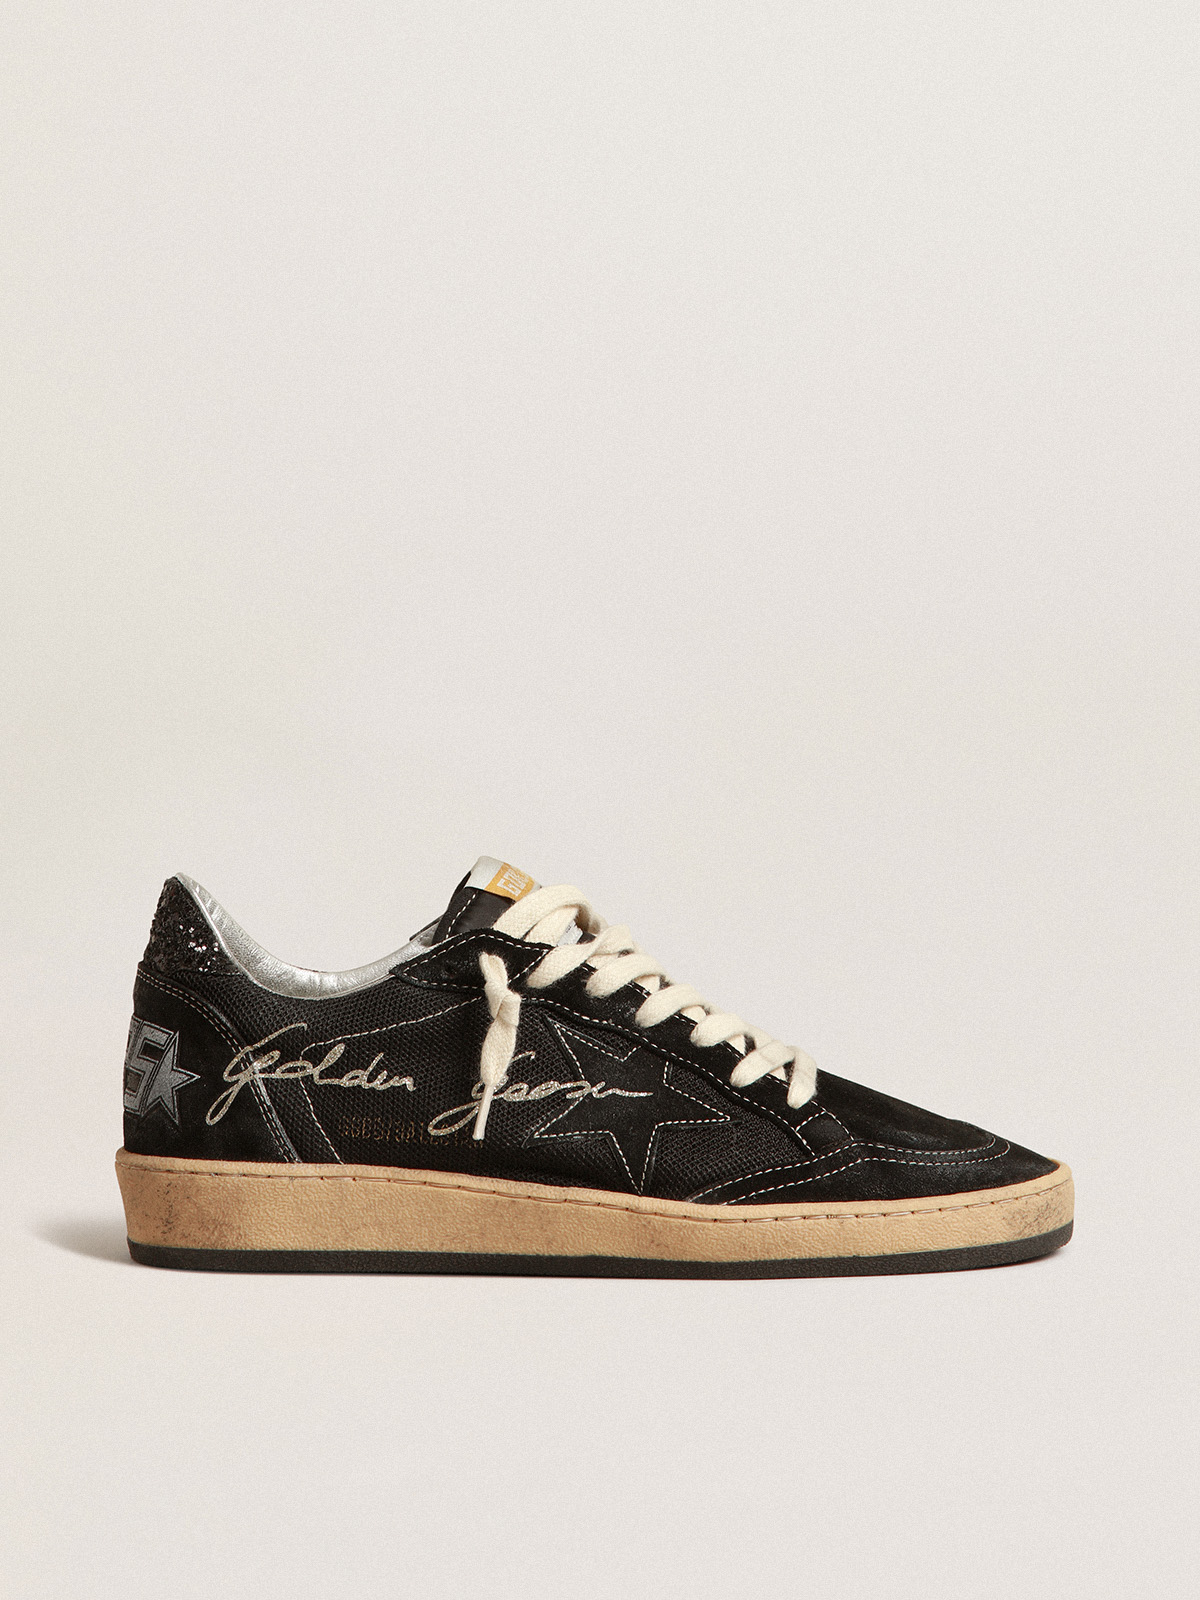 Ball Star in black mesh with black suede star | Golden Goose